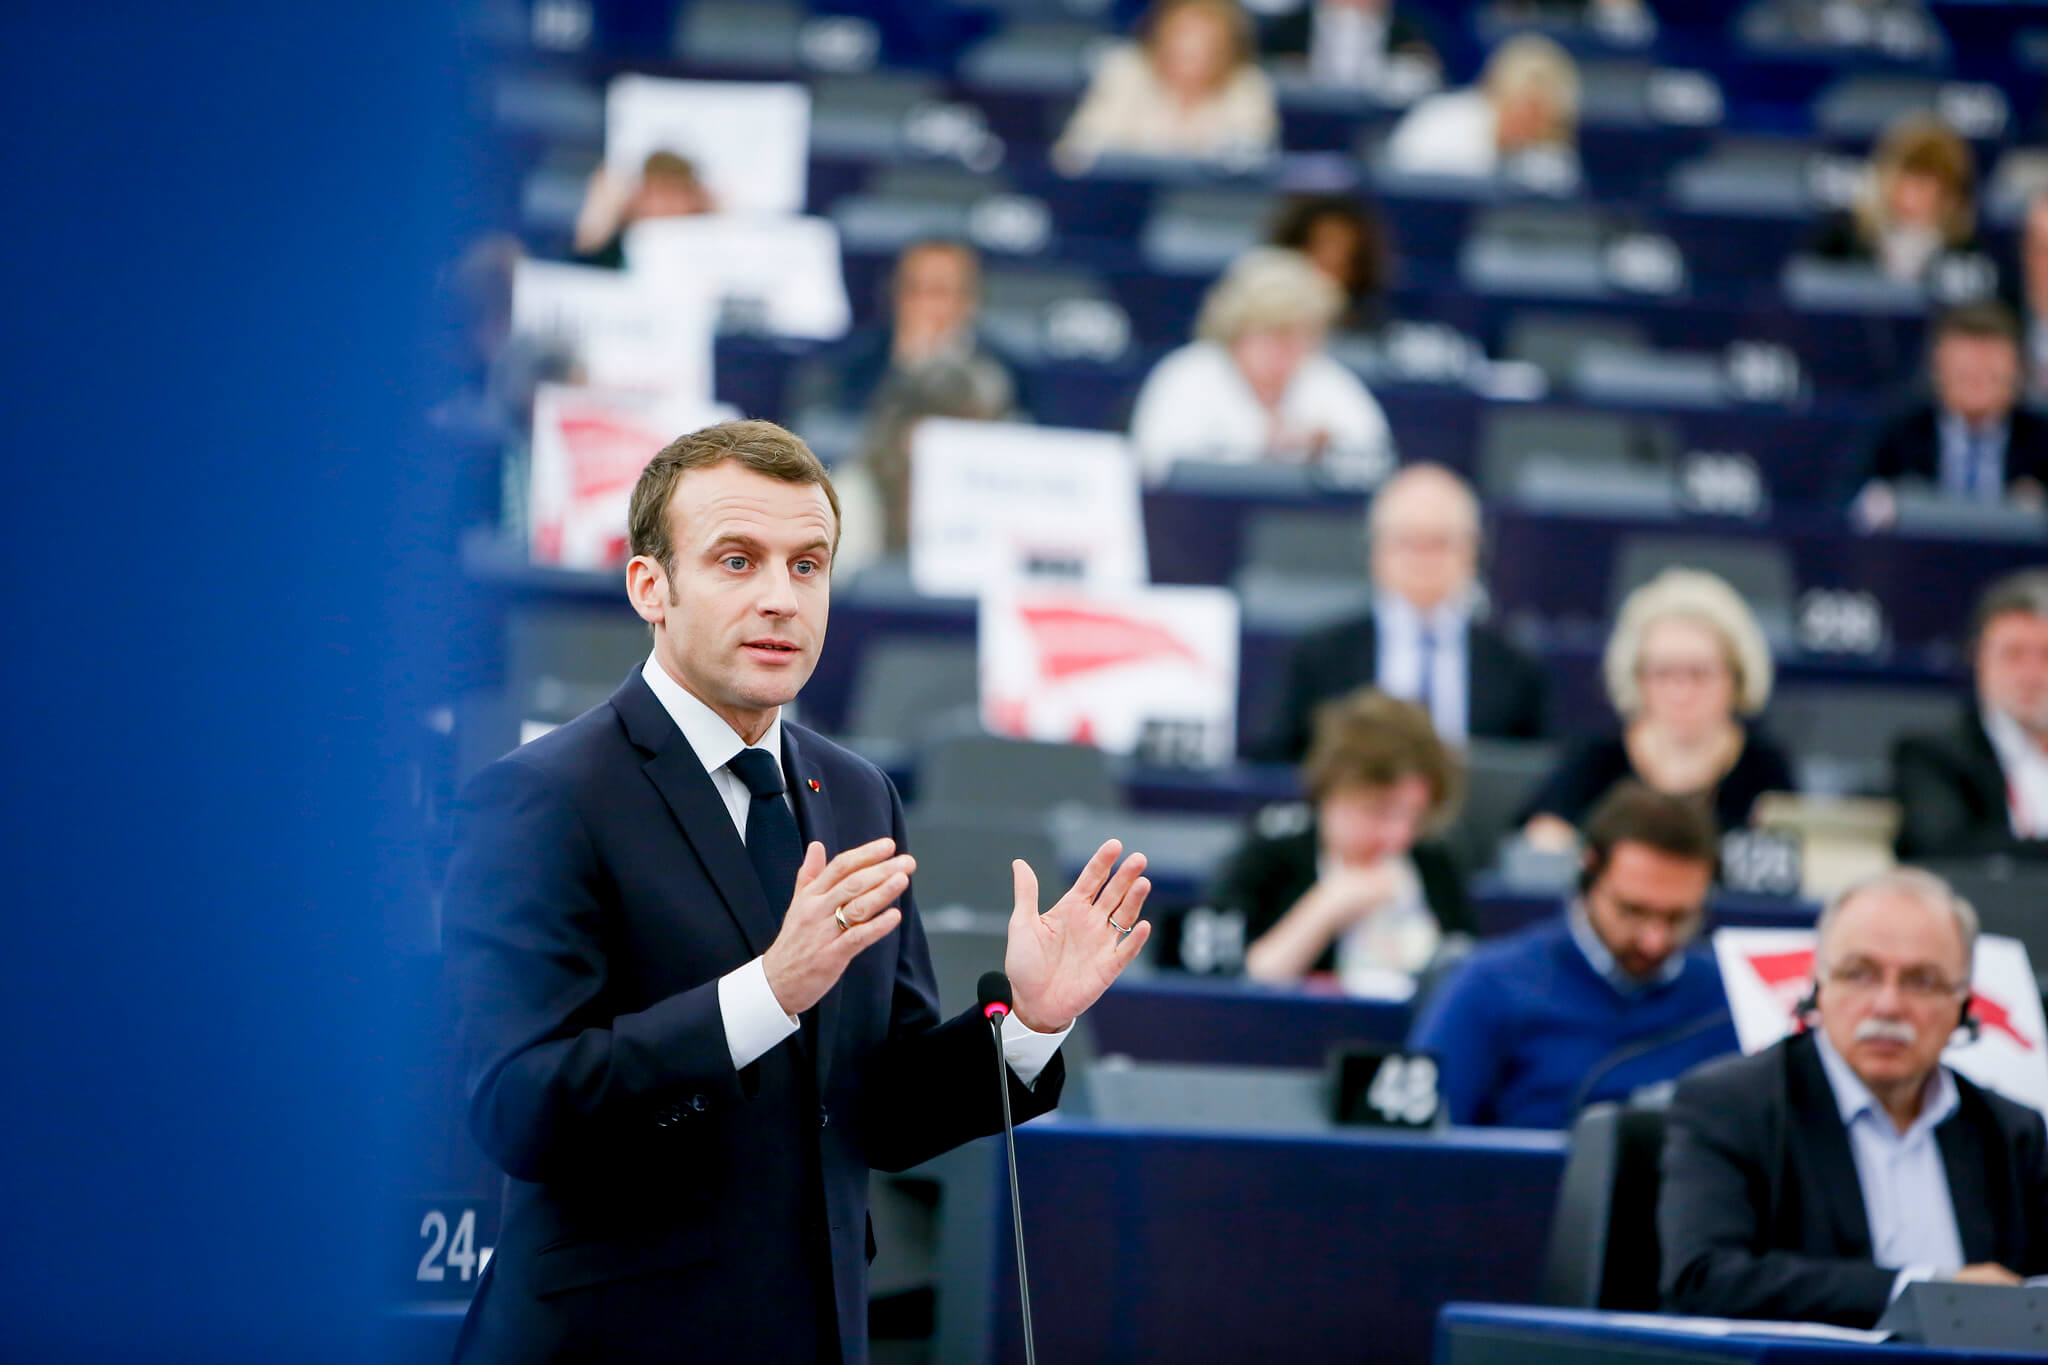 Debate with Macron on the Future of Europe. © GUE/NGL / Flickr